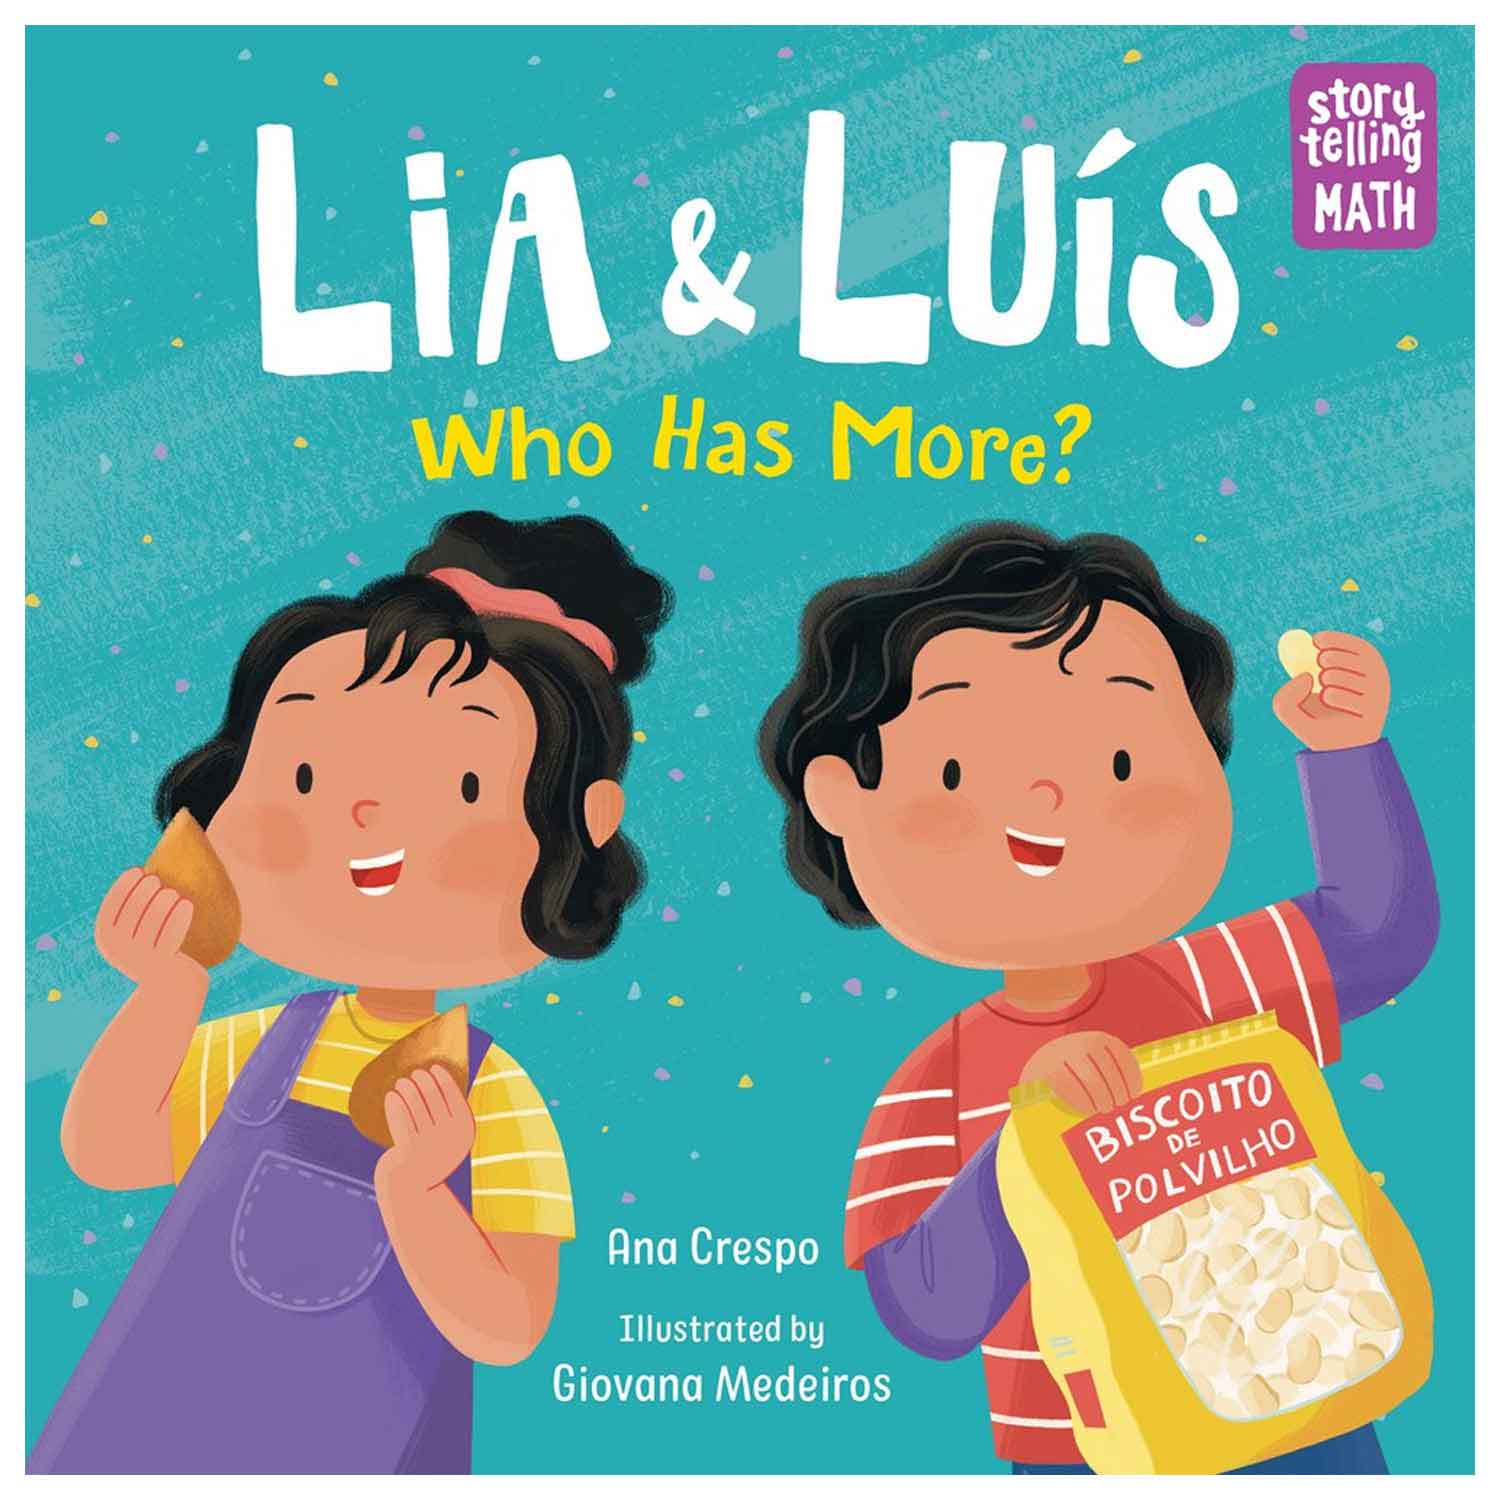 Storytelling Math Lia & Luis: Who Has More?